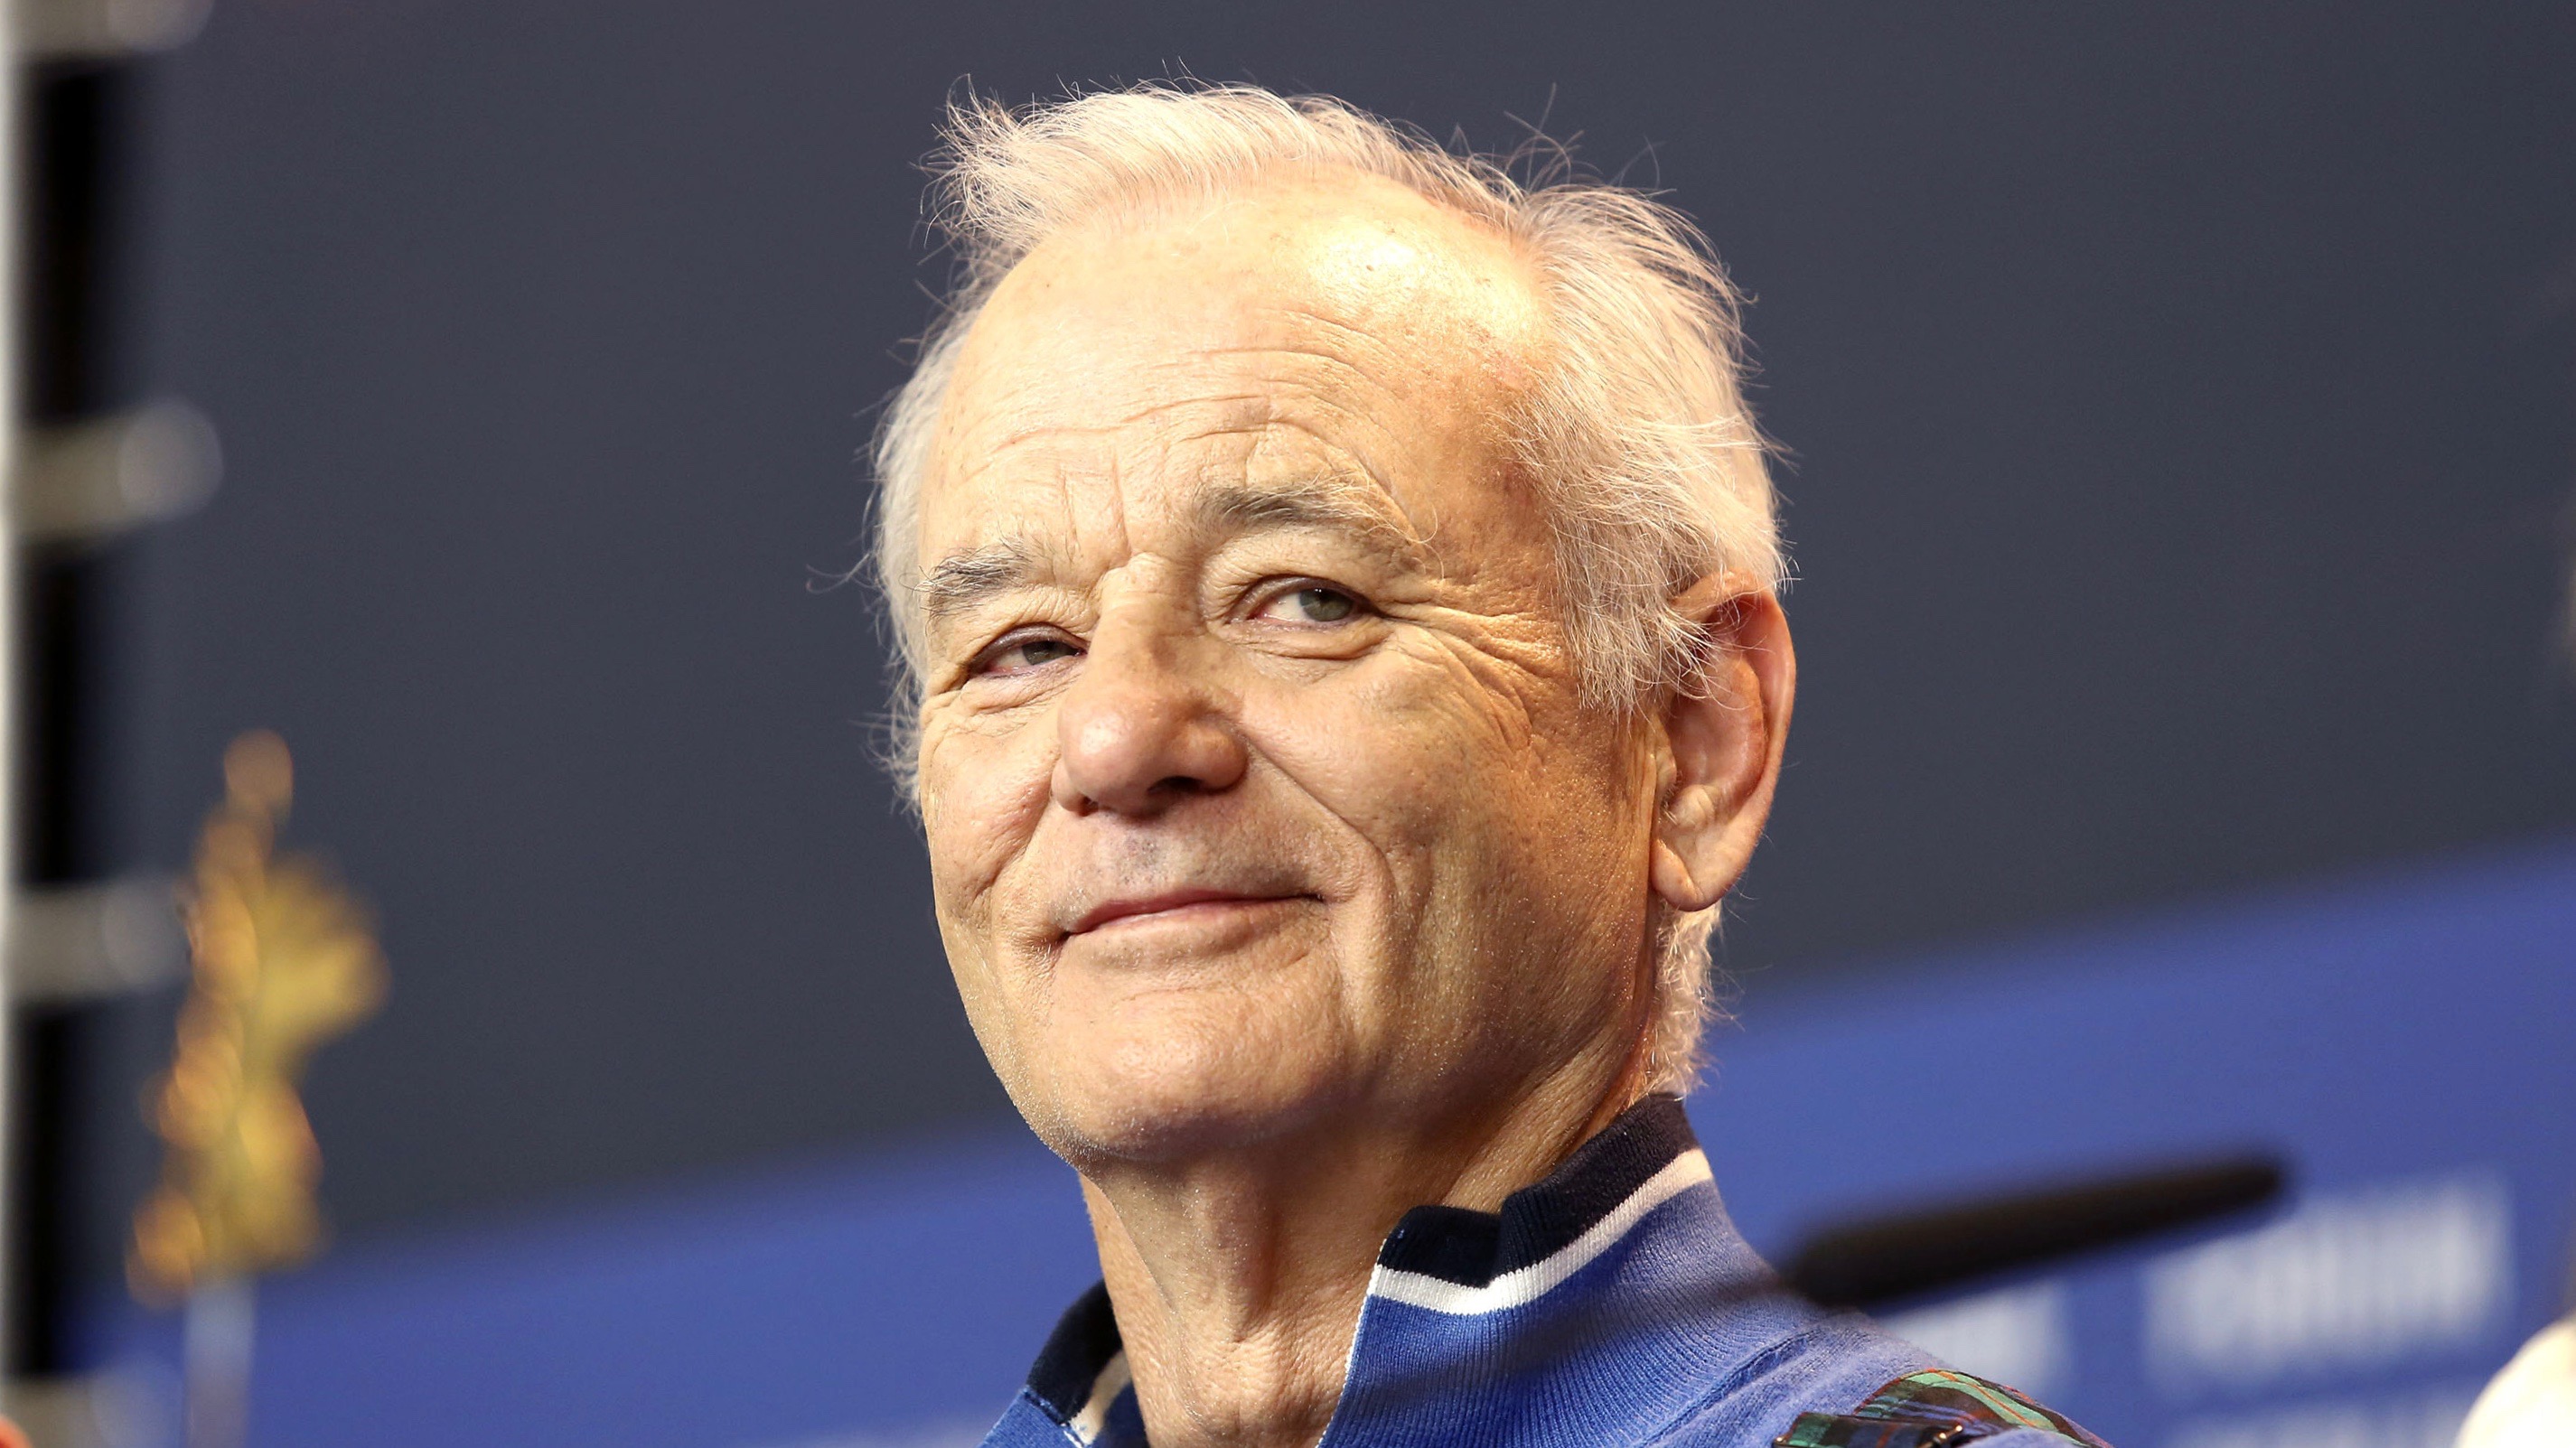 Sofia Coppola Reunites With Bill Murray for 'On the Rocks